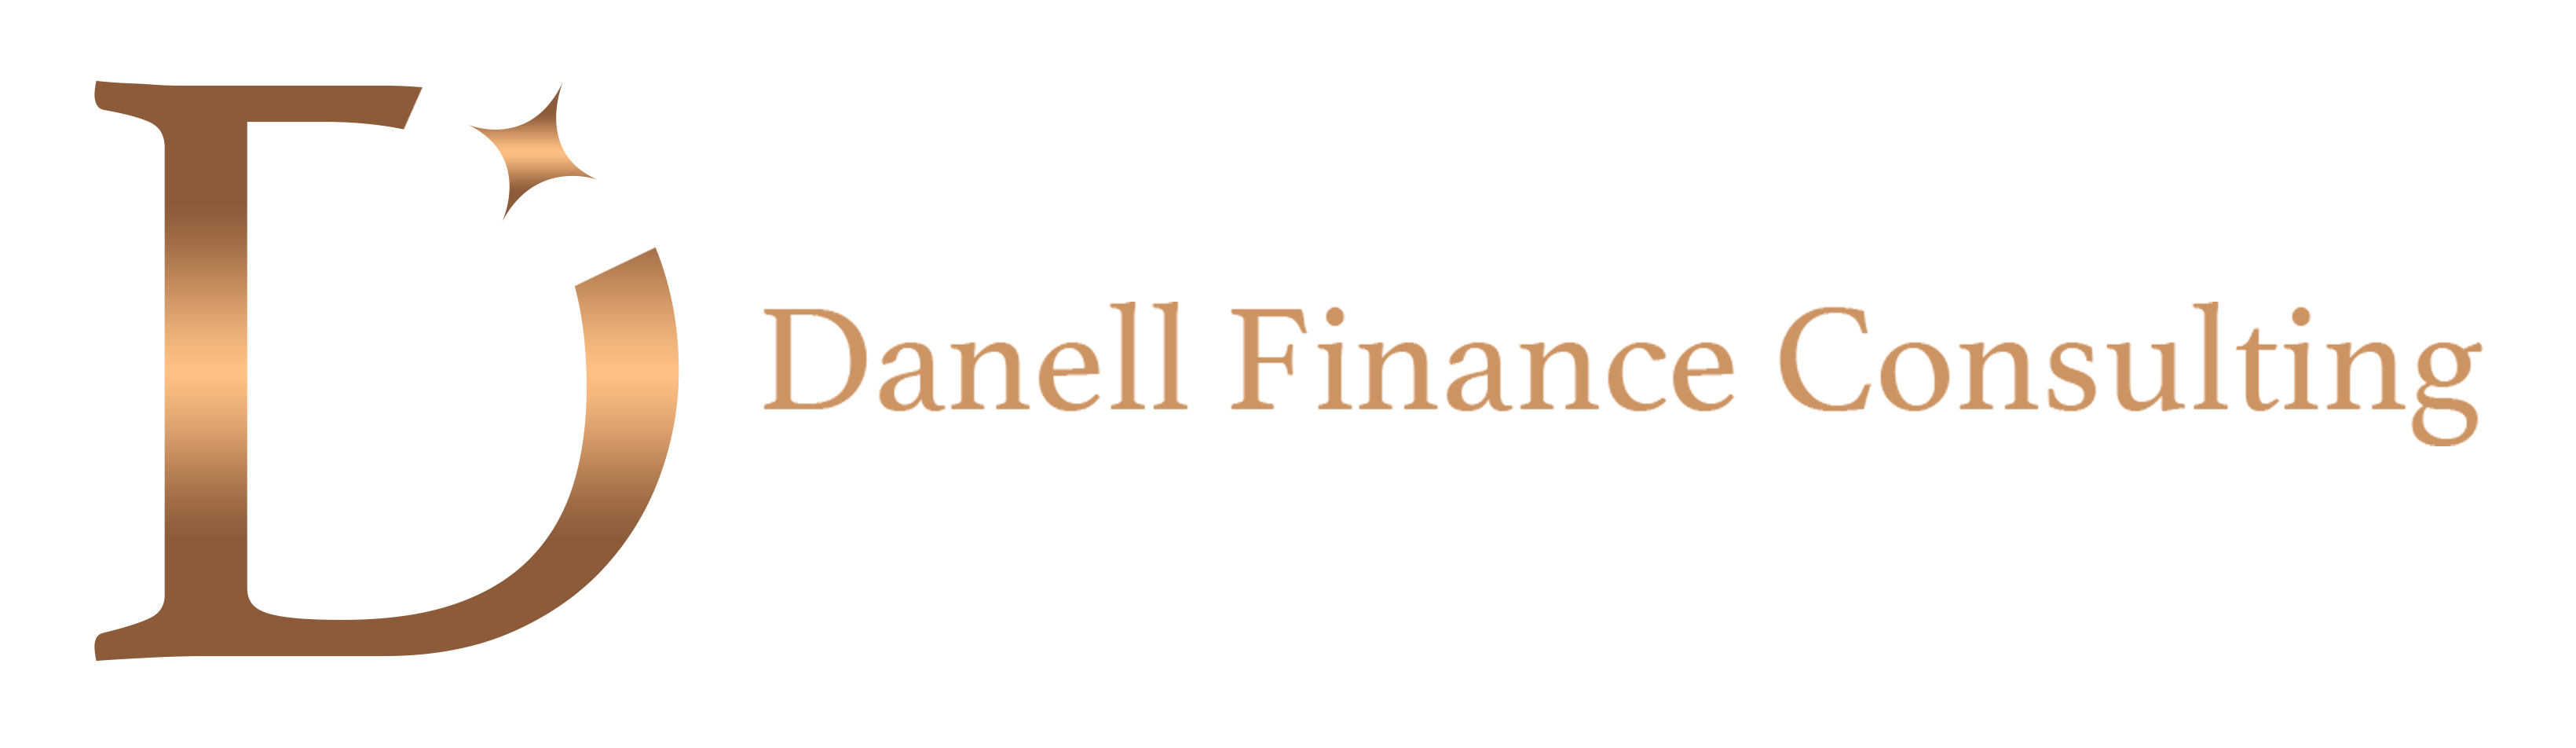 Danell Finance Consulting